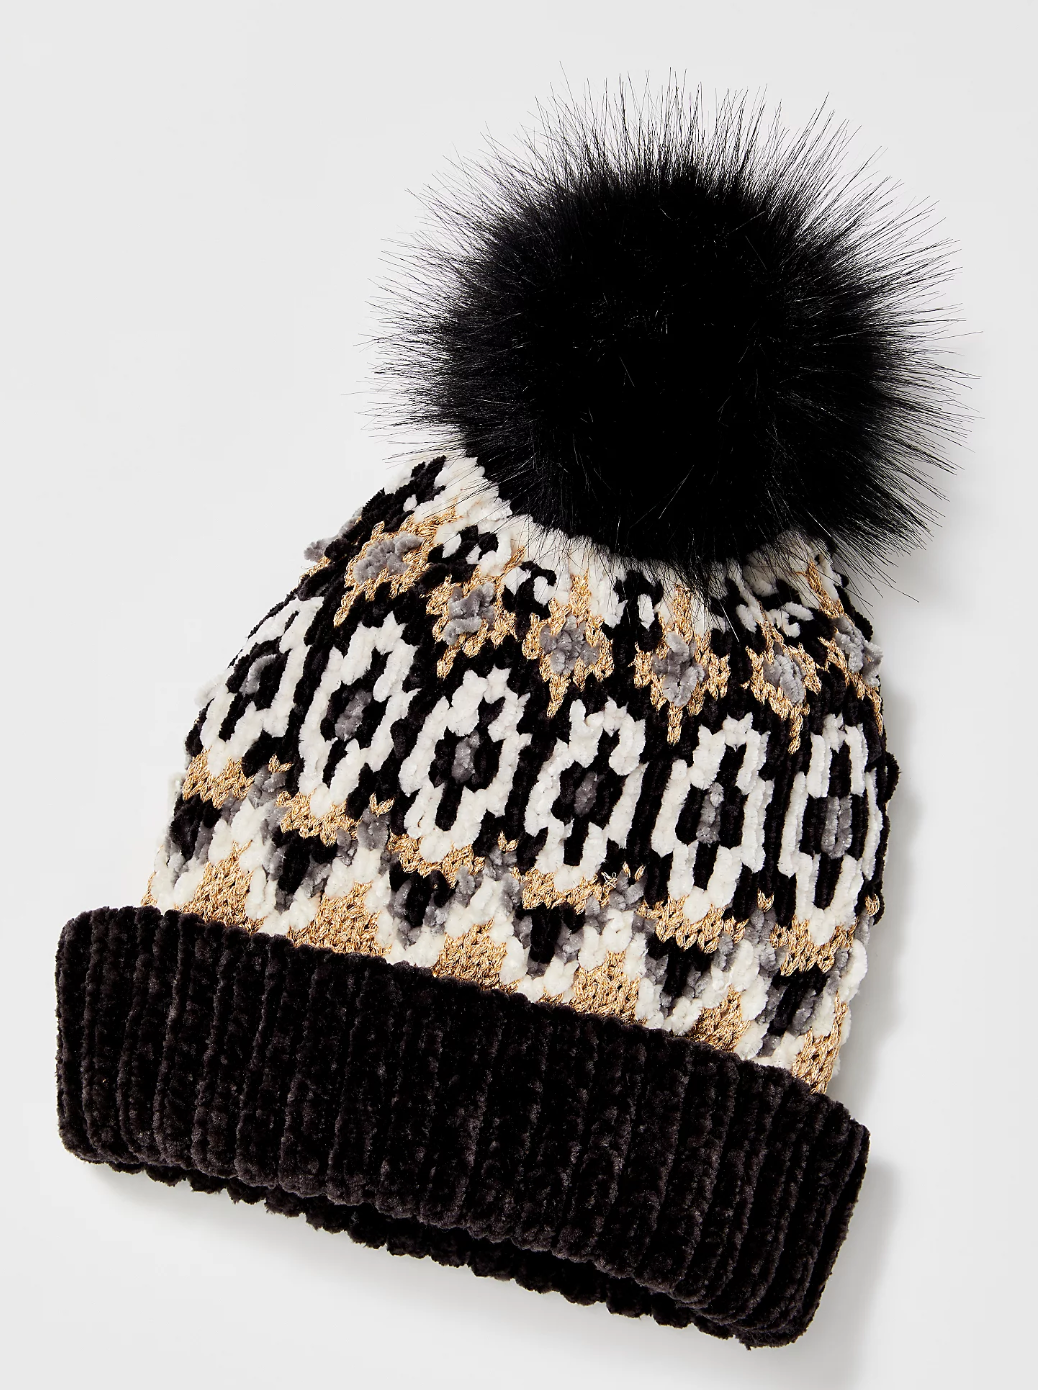 Free People CHALET FAIRISLE hand knit Winter Snow Hat beanie with pom pom Mustard and Black